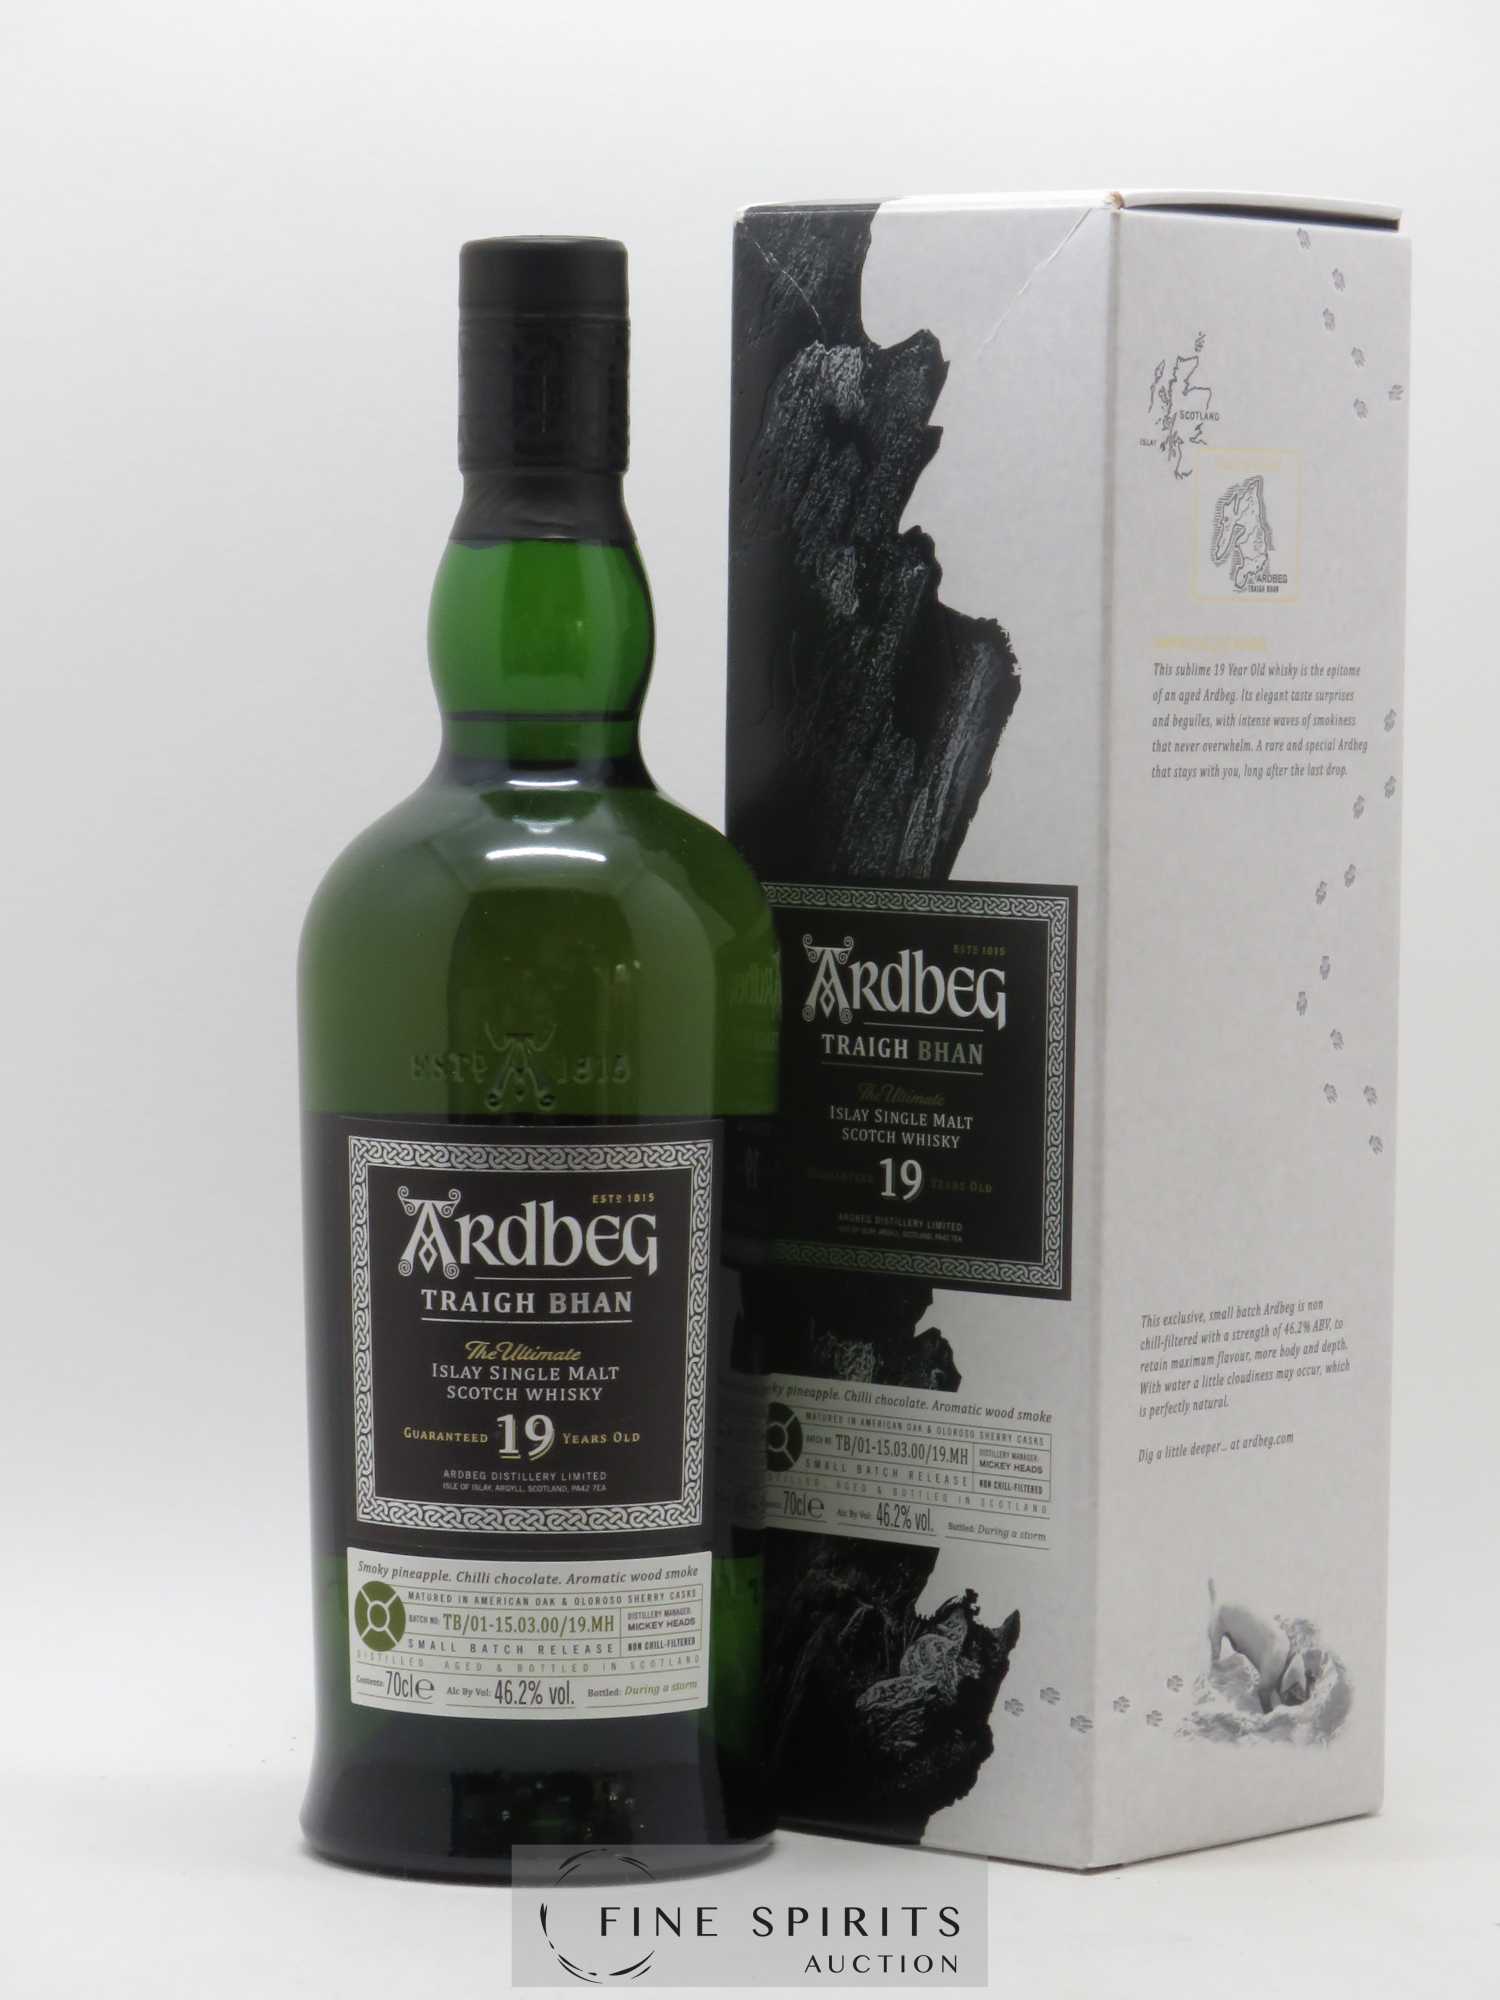 Ardbeg 19 years Of. Traigh Bhan TB-01-15.03.00-19.MH The Ultimate 